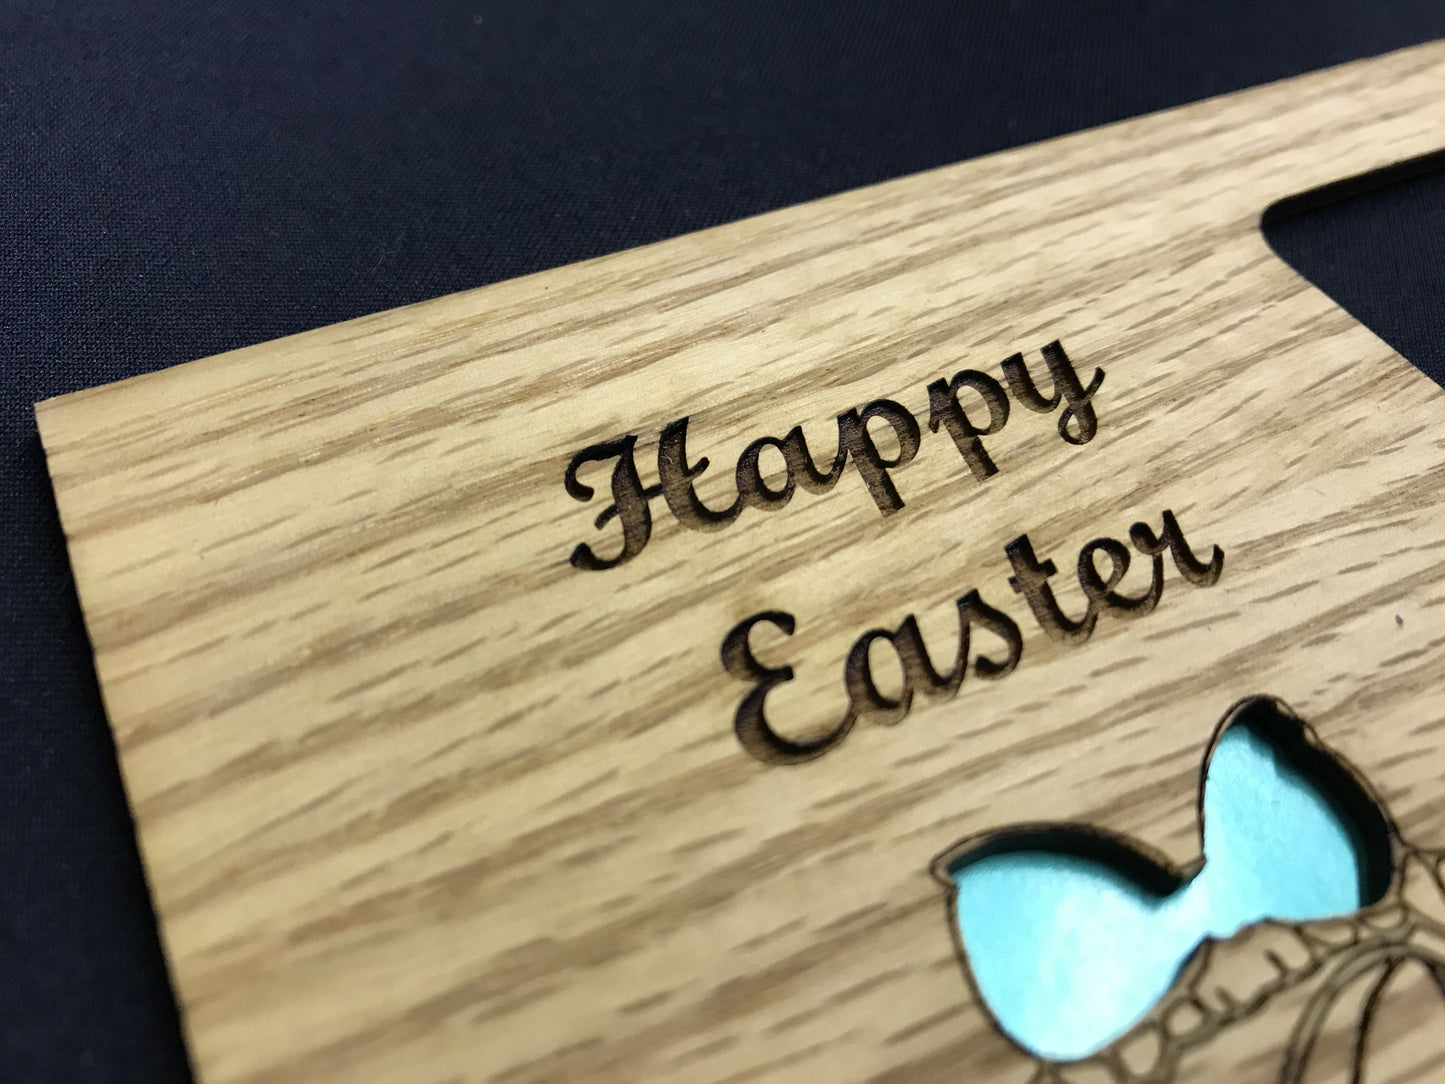 Happy Easter Picture Frame - 5x7 Frame Holds 3x4 Photo